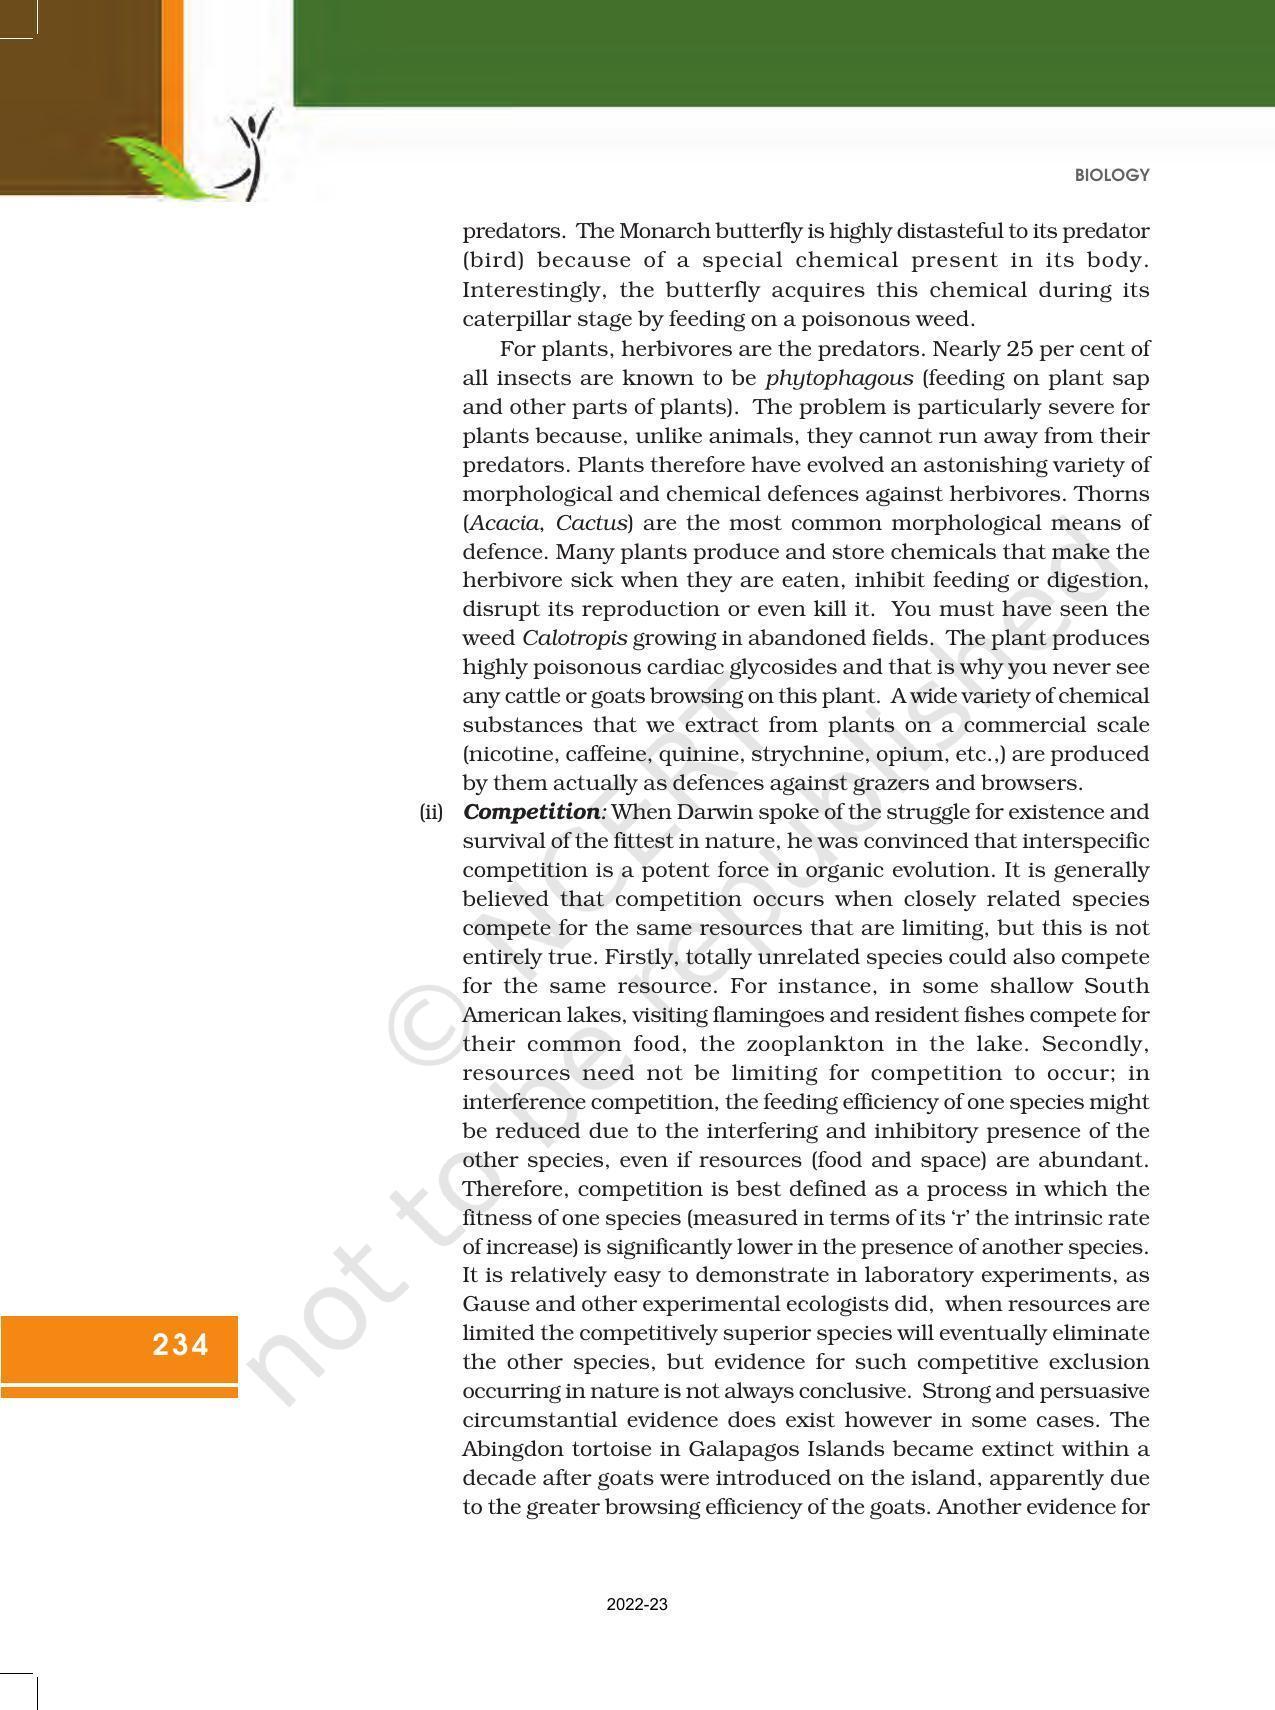 NCERT Book for Class 12 Biology Chapter 13 Organisms and Populations - Page 18